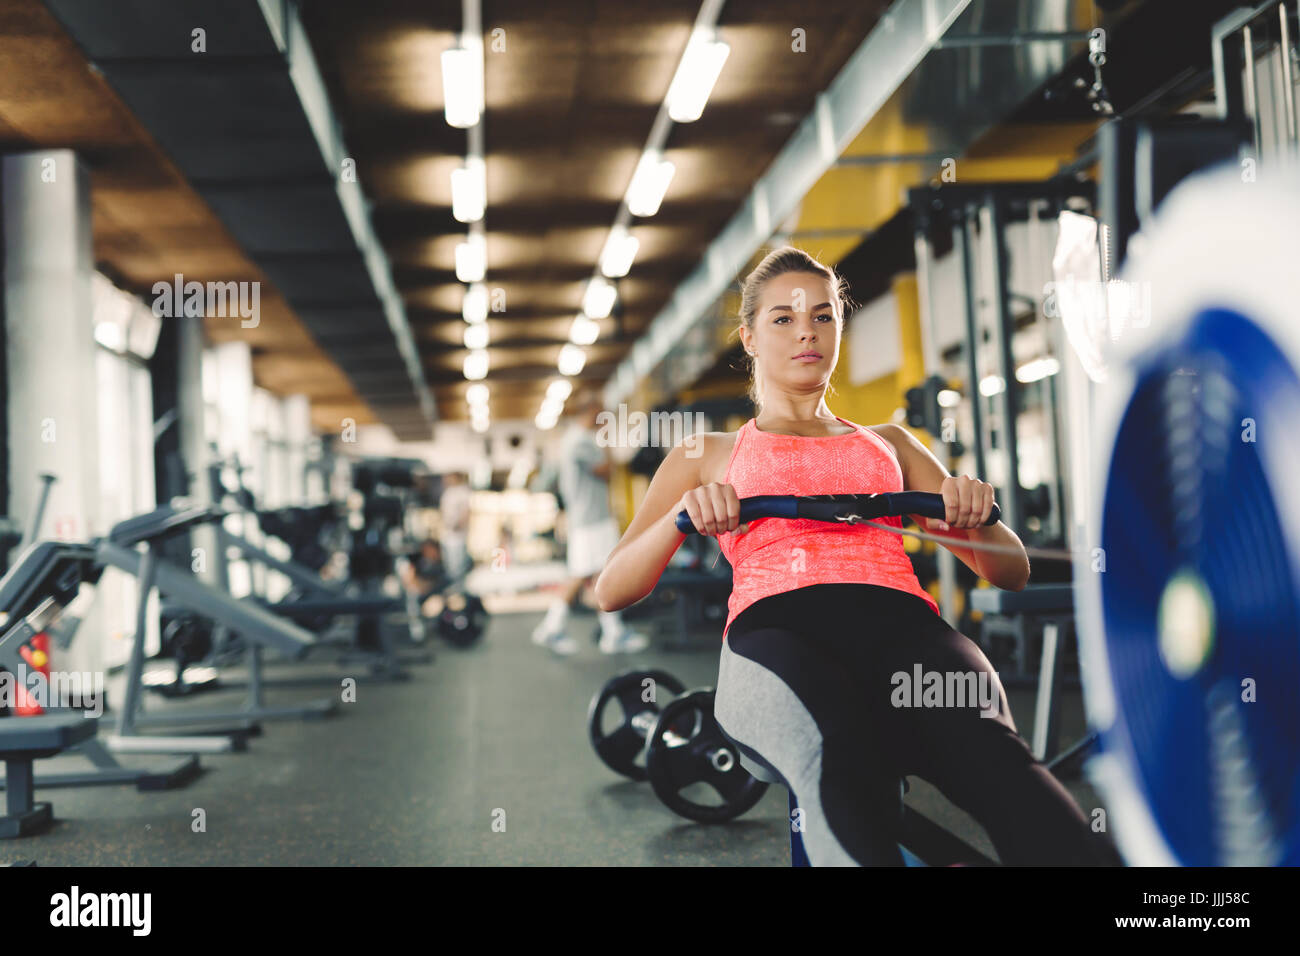 Young cute woman doing exercises with rowing machine Stock Photo